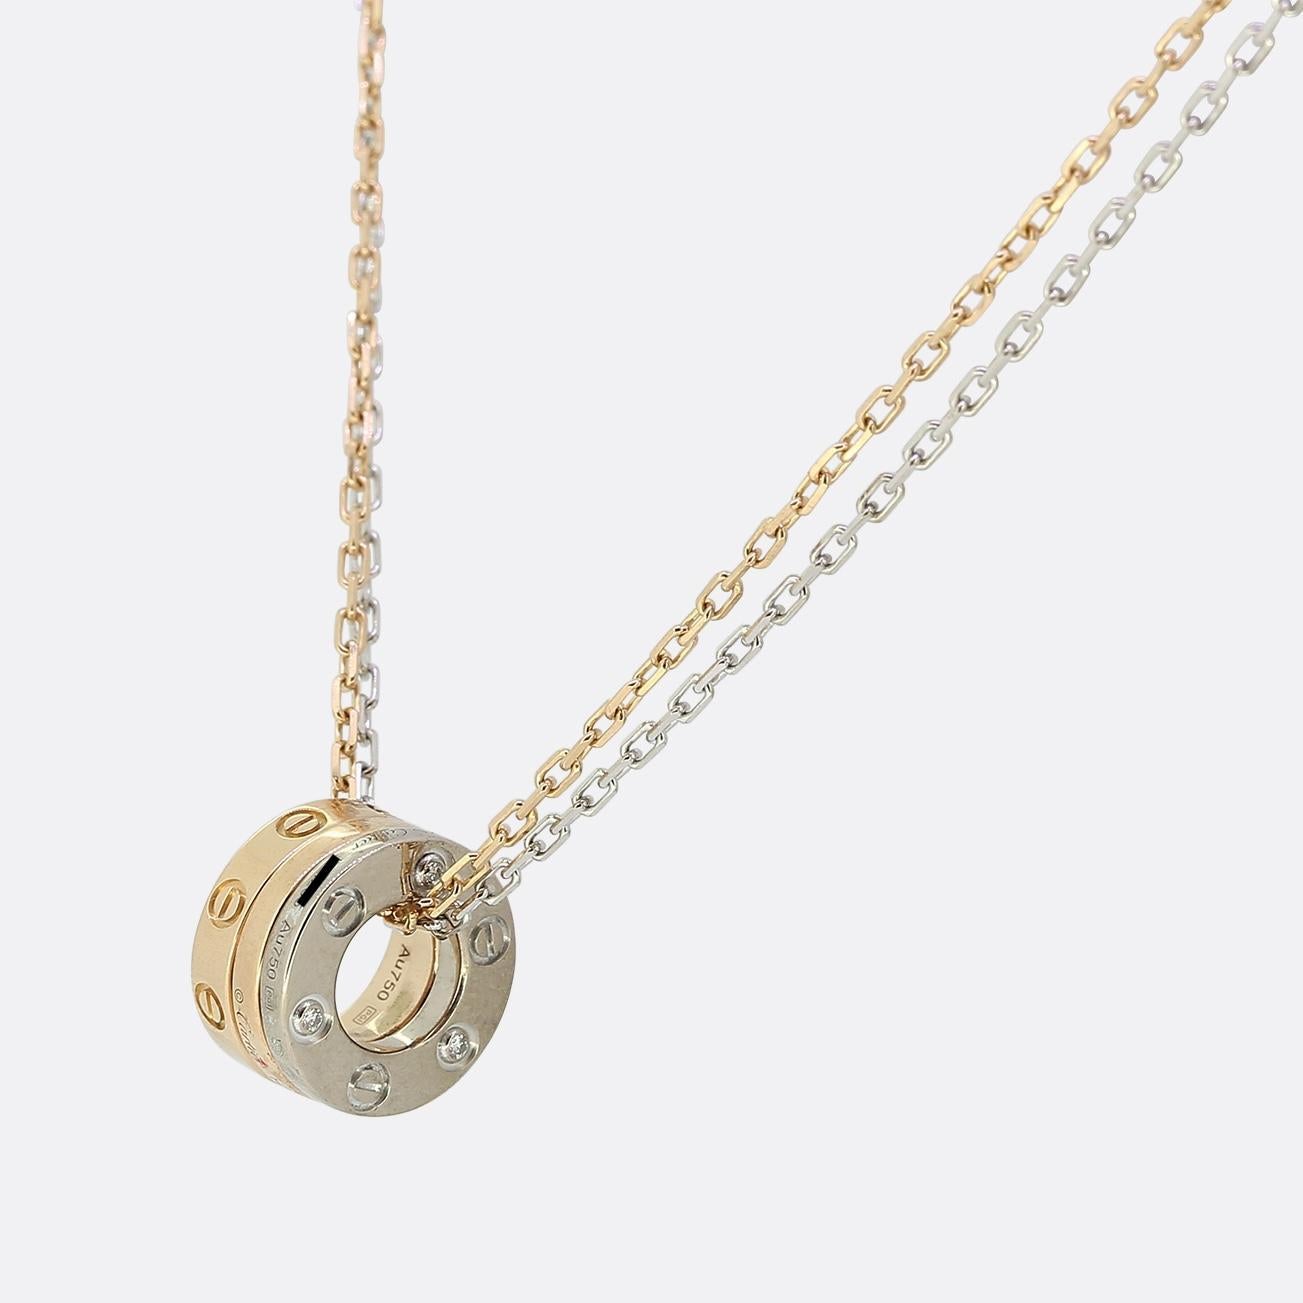 Here we have a chic and stylish necklace from the world renowned jewellery house of Cartier. A trio of pendants on show boast Cartier's most celebrated design taken from the LOVE collection. One mini ring and two mini circles showcase the iconic